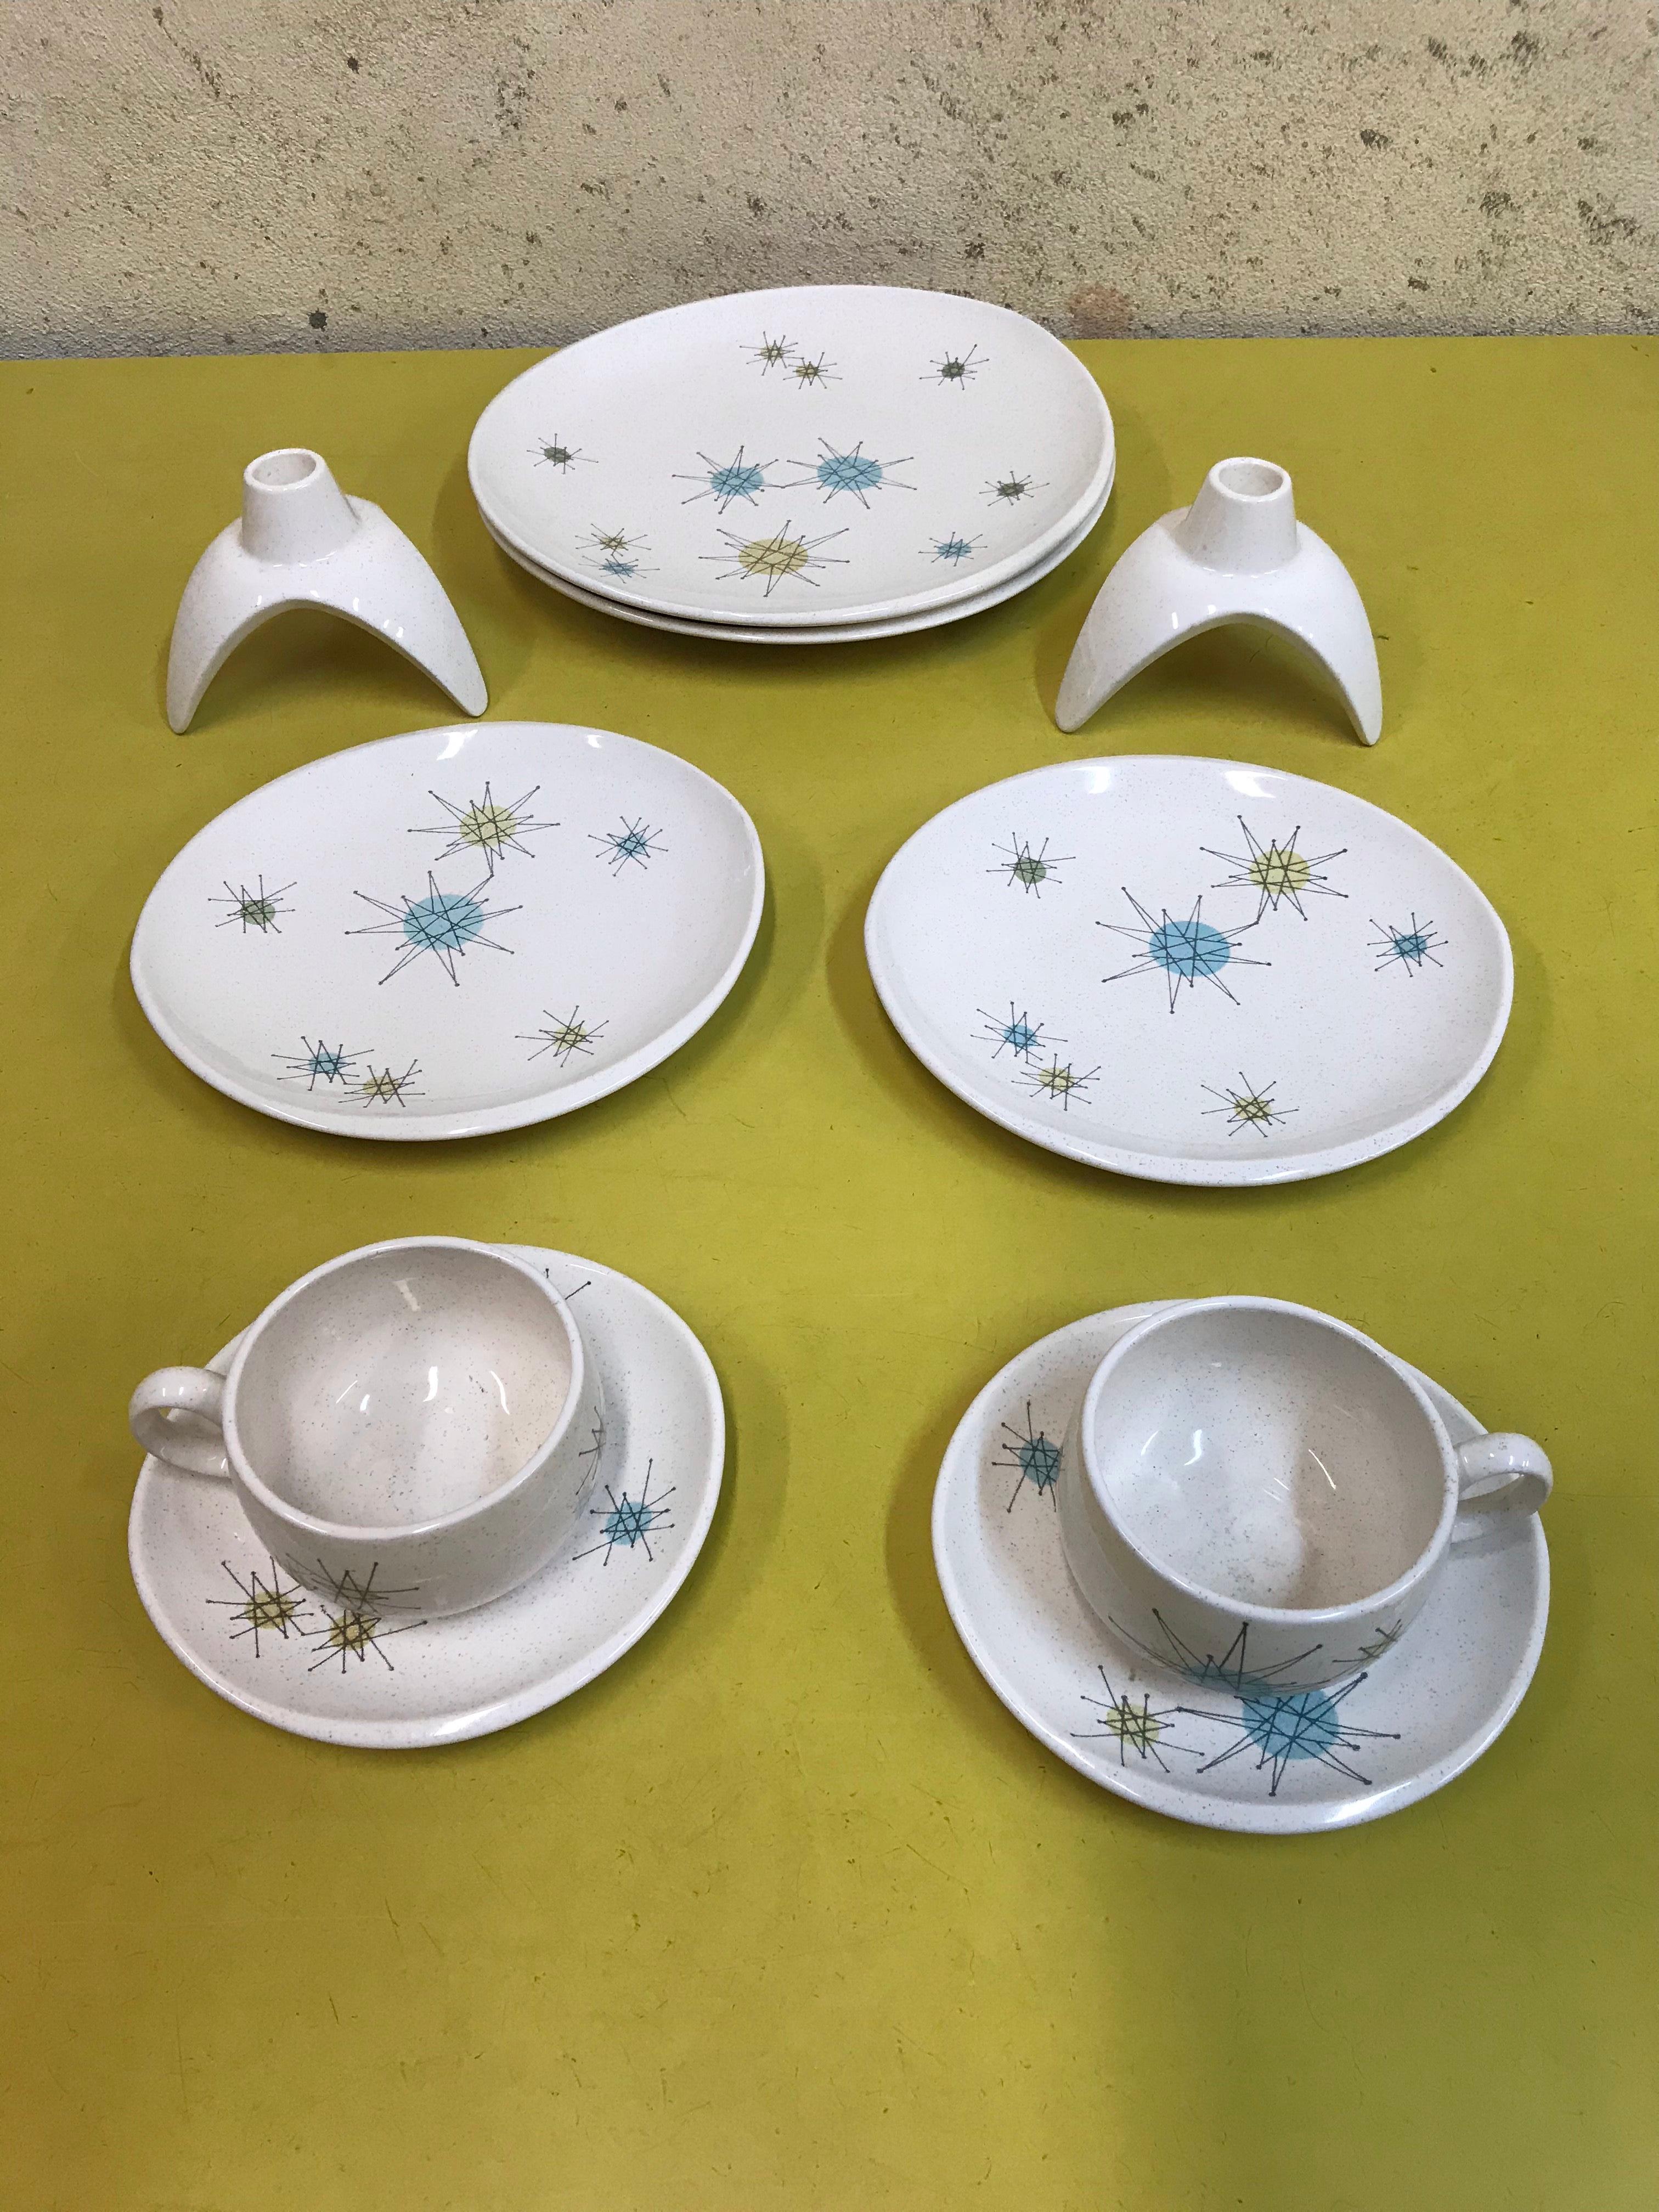 Franciscan Atomic starburst dinner set 2-dinner plates ,2- salad plates, 2- coffee cups and saucers. Included in this set is matching Franciscan candleholders!

